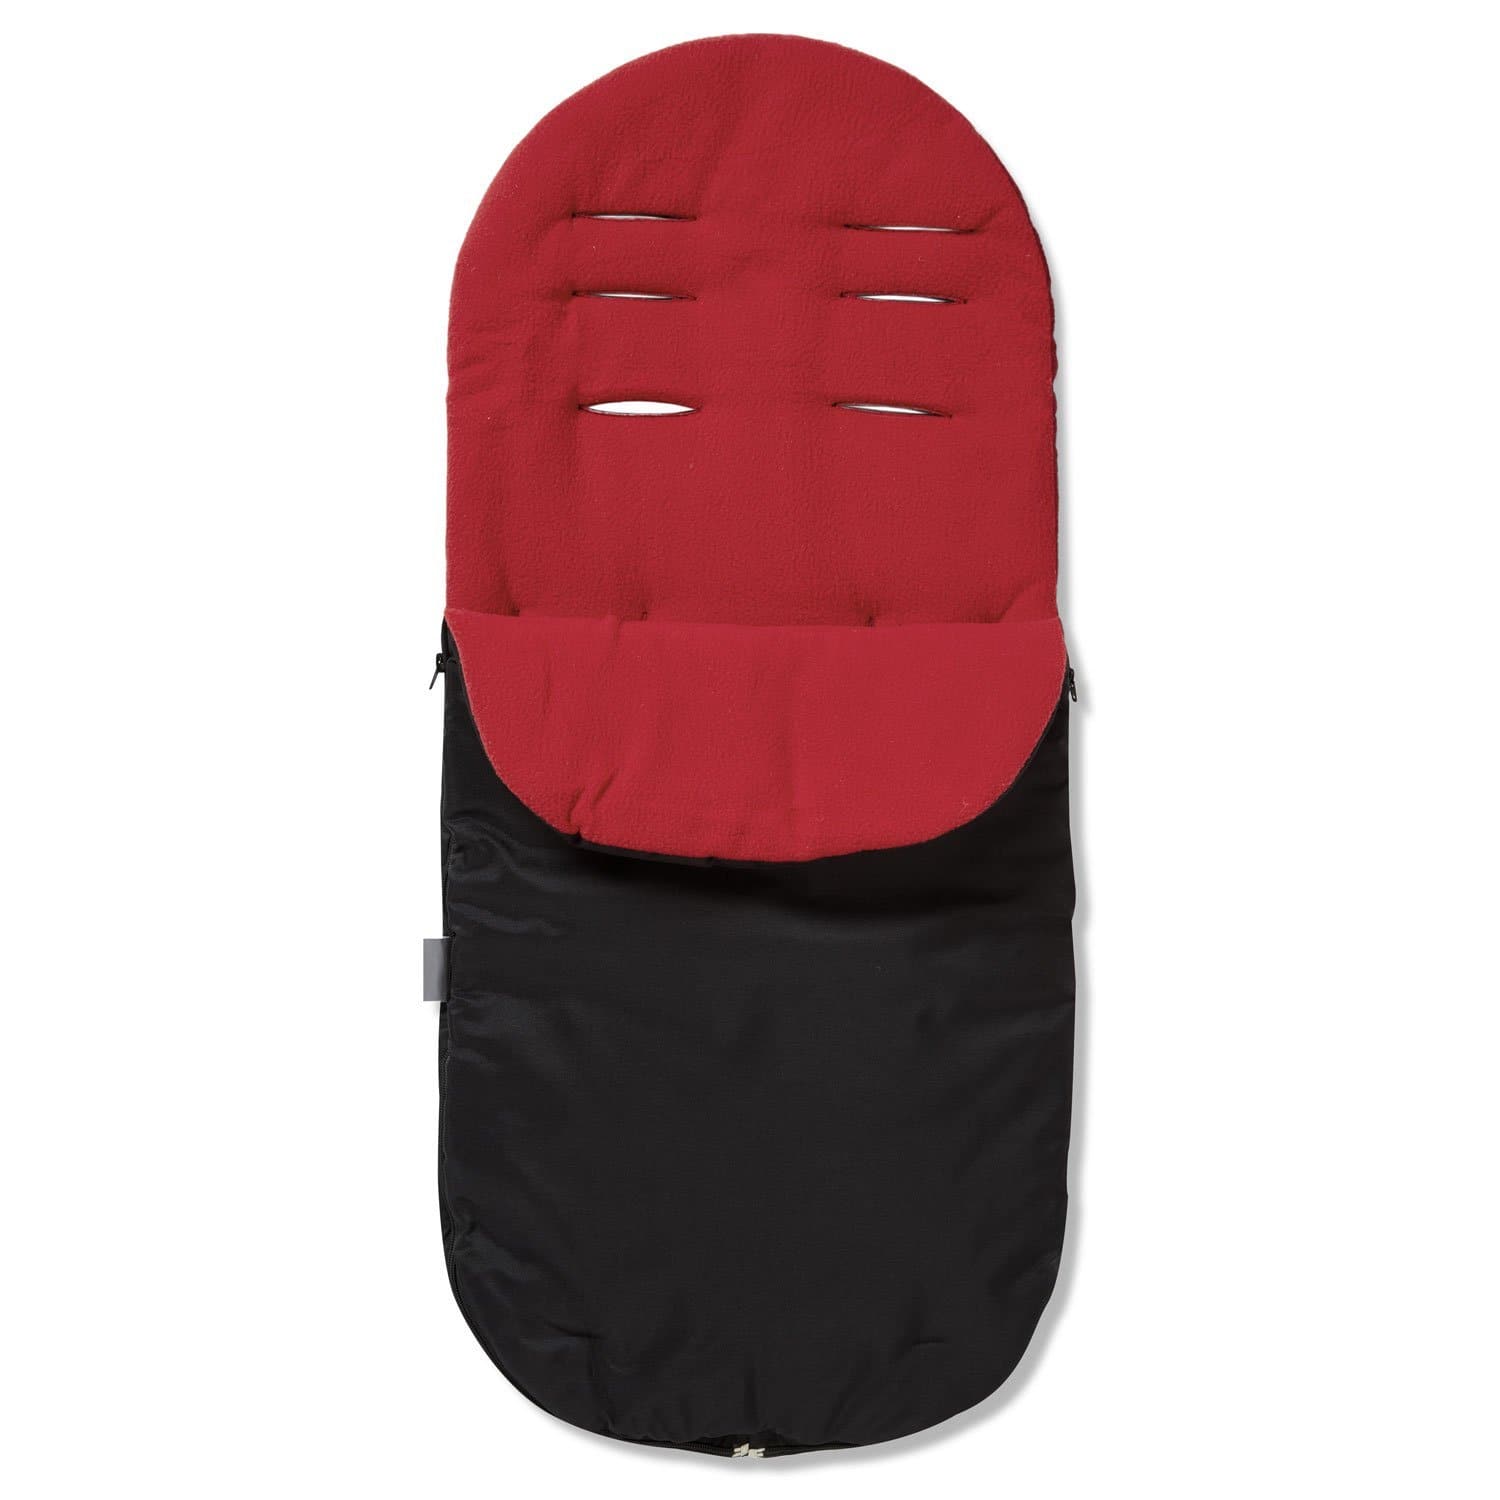 Footmuff / Cosy Toes Compatible with My Child - Red / Fits All Models | For Your Little One